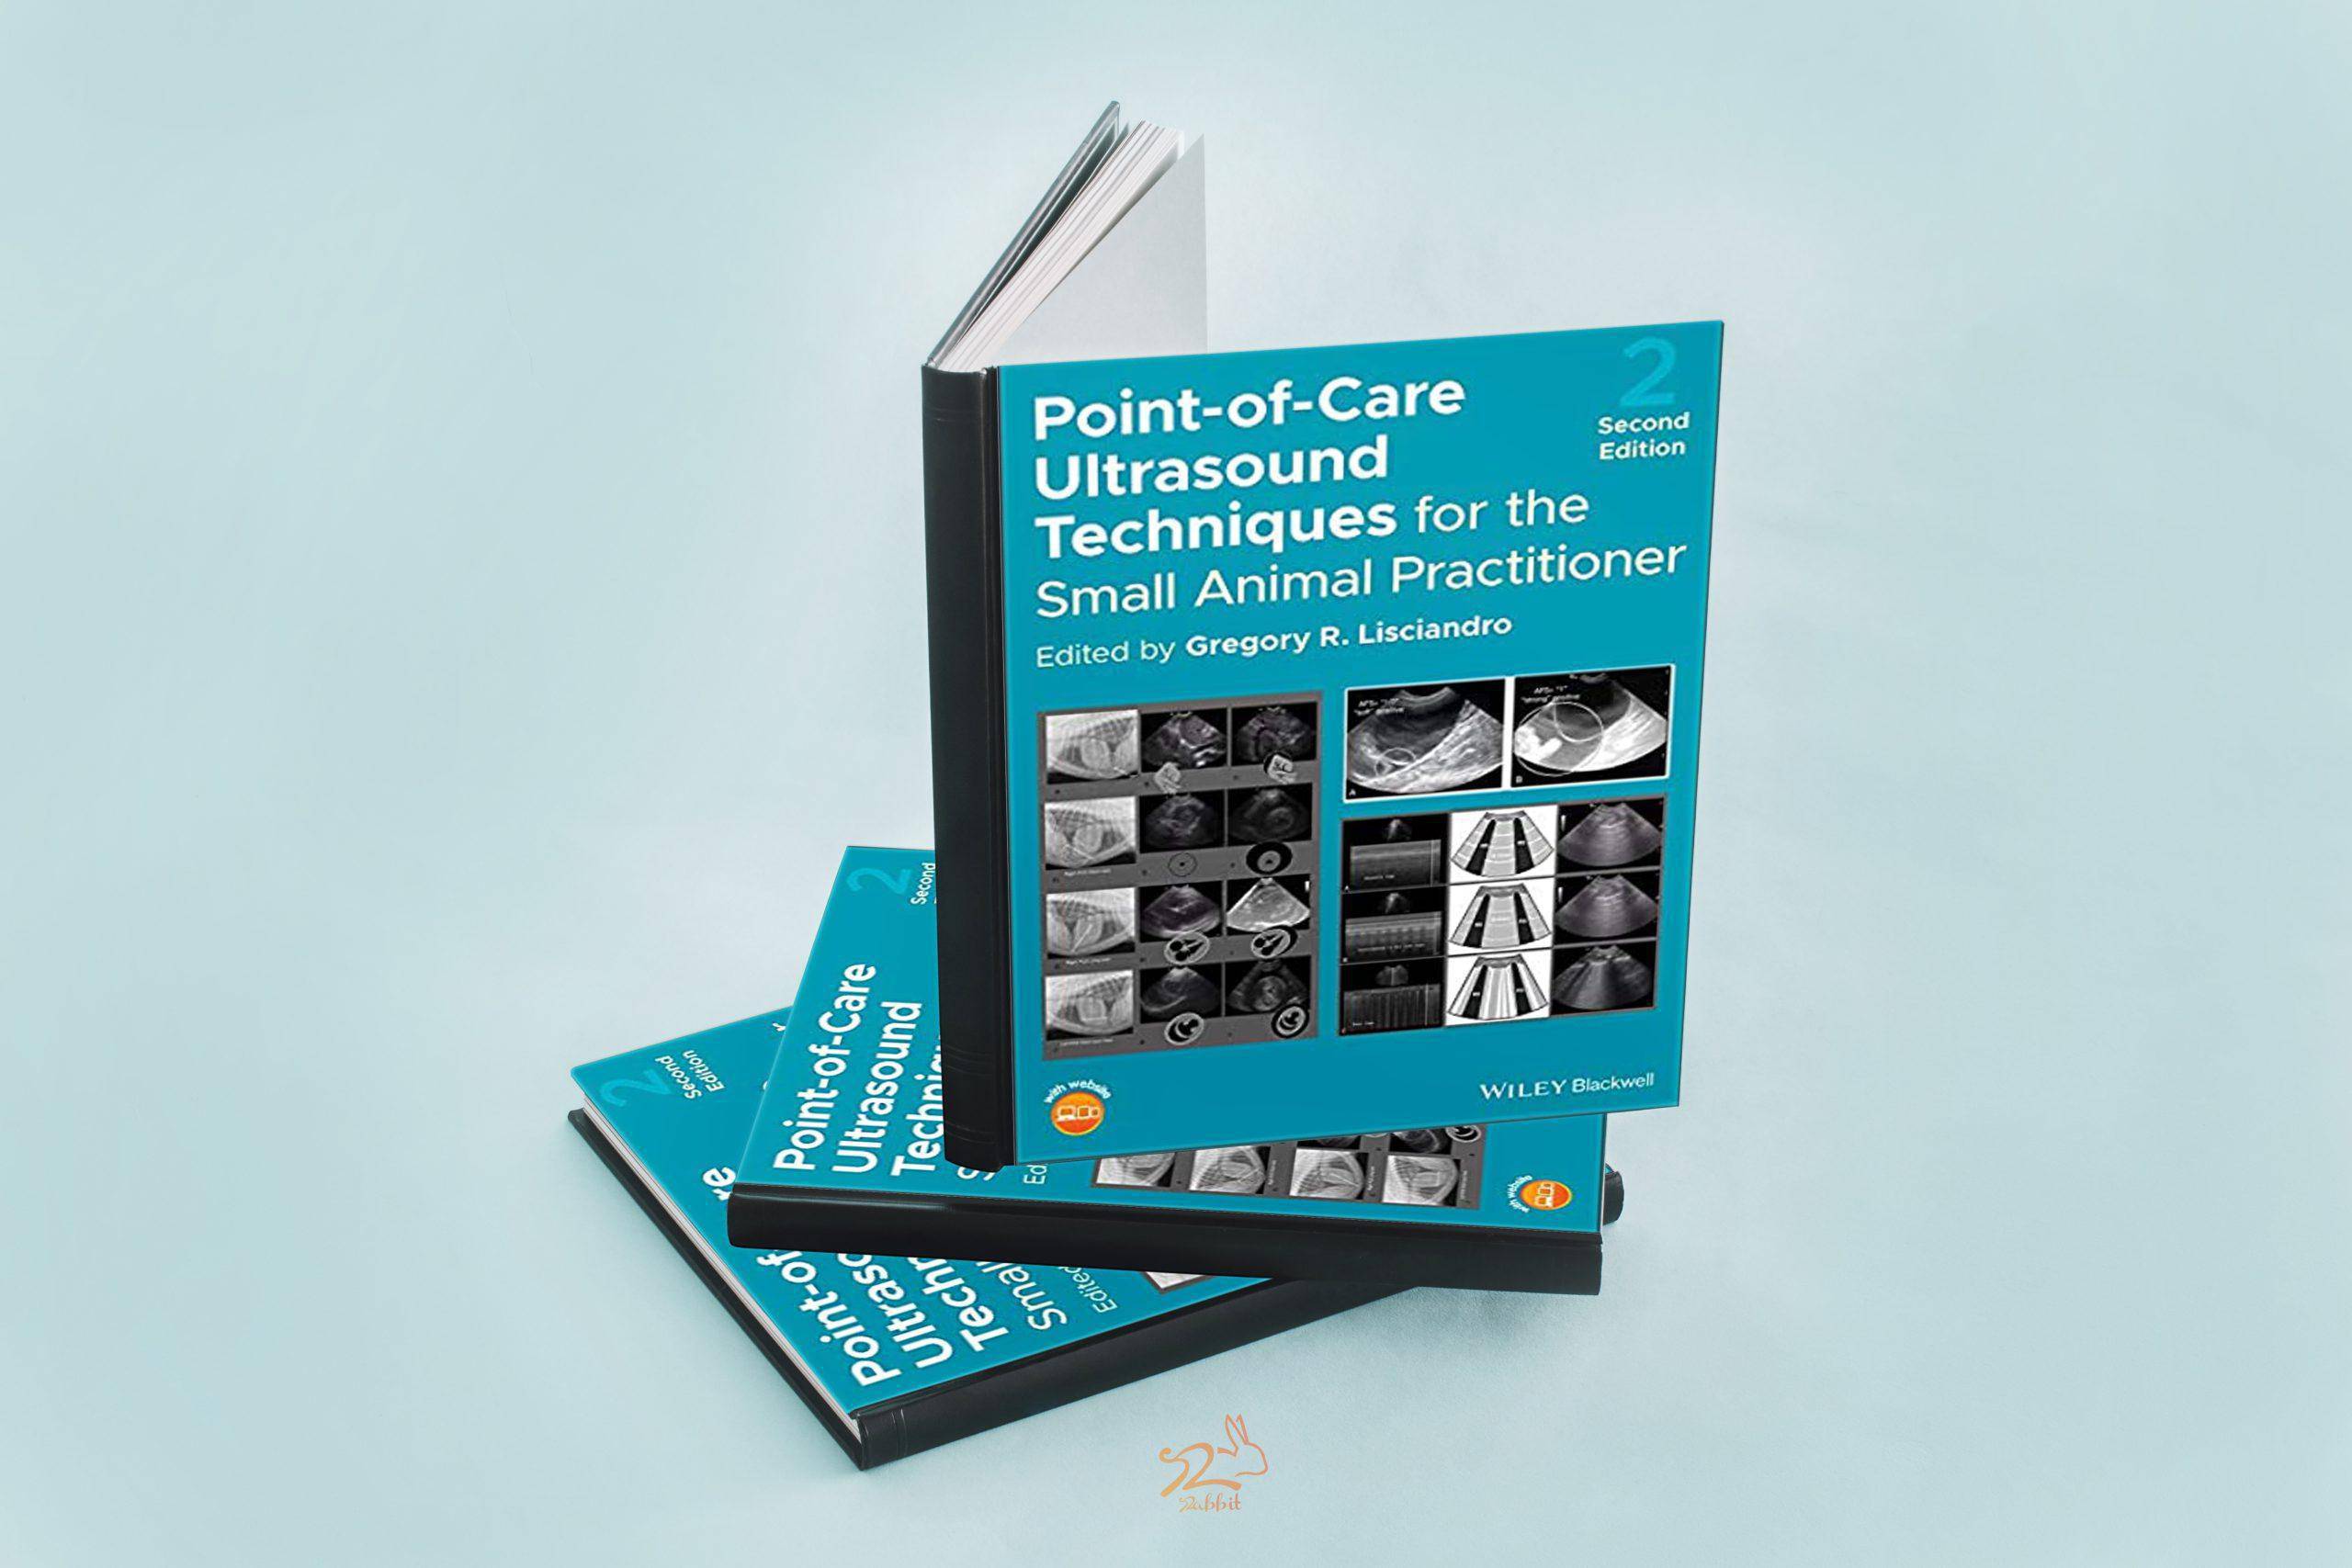 point-of-care ultrasound techniques for the small animal practitioner